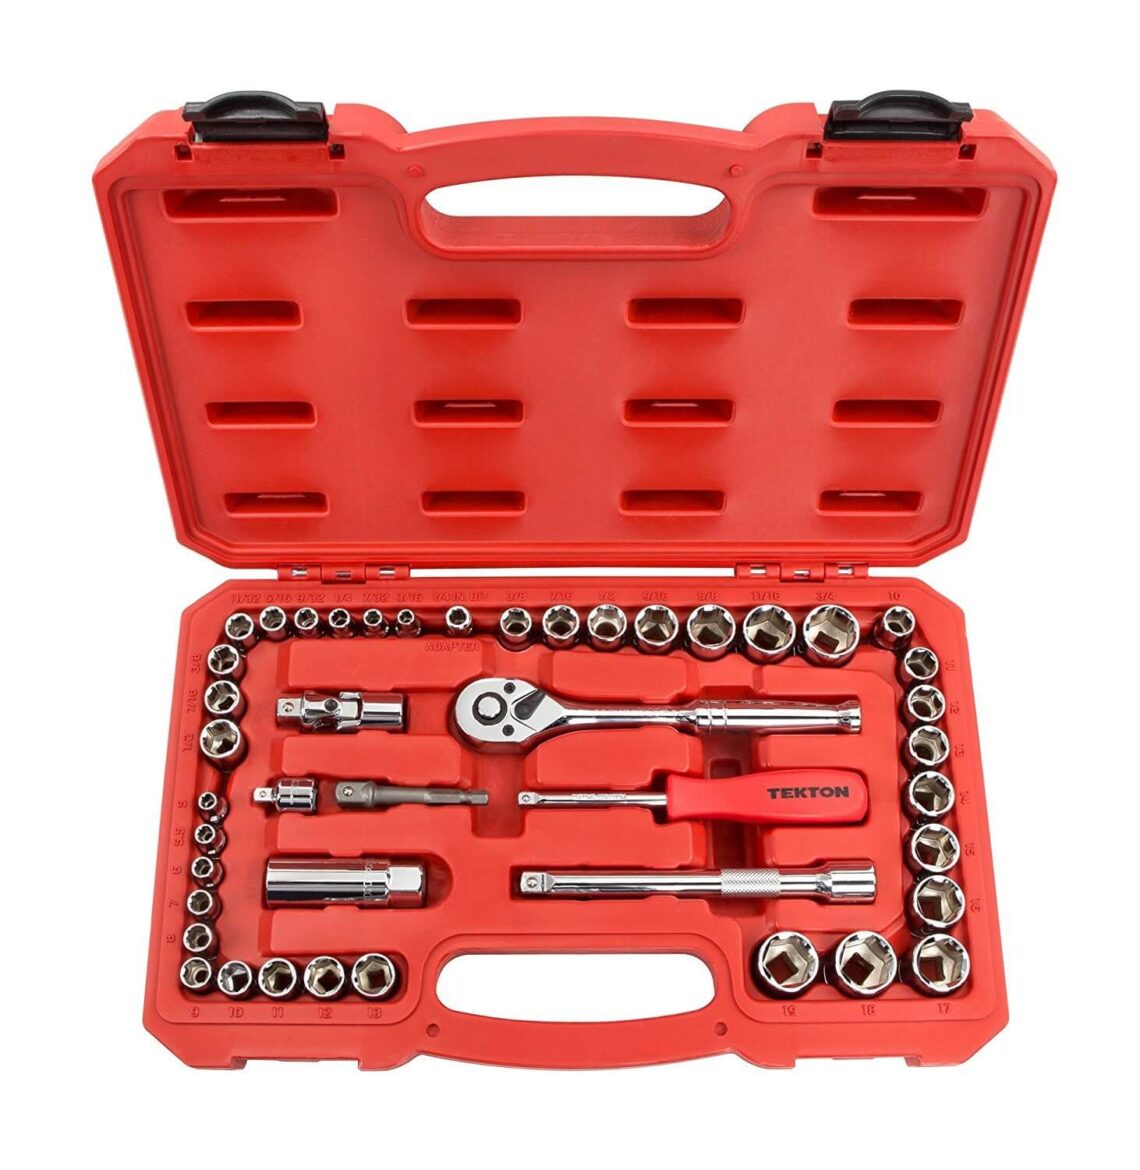 TEKTON Tools | New New Socket Sets Review (Buyers Guide)